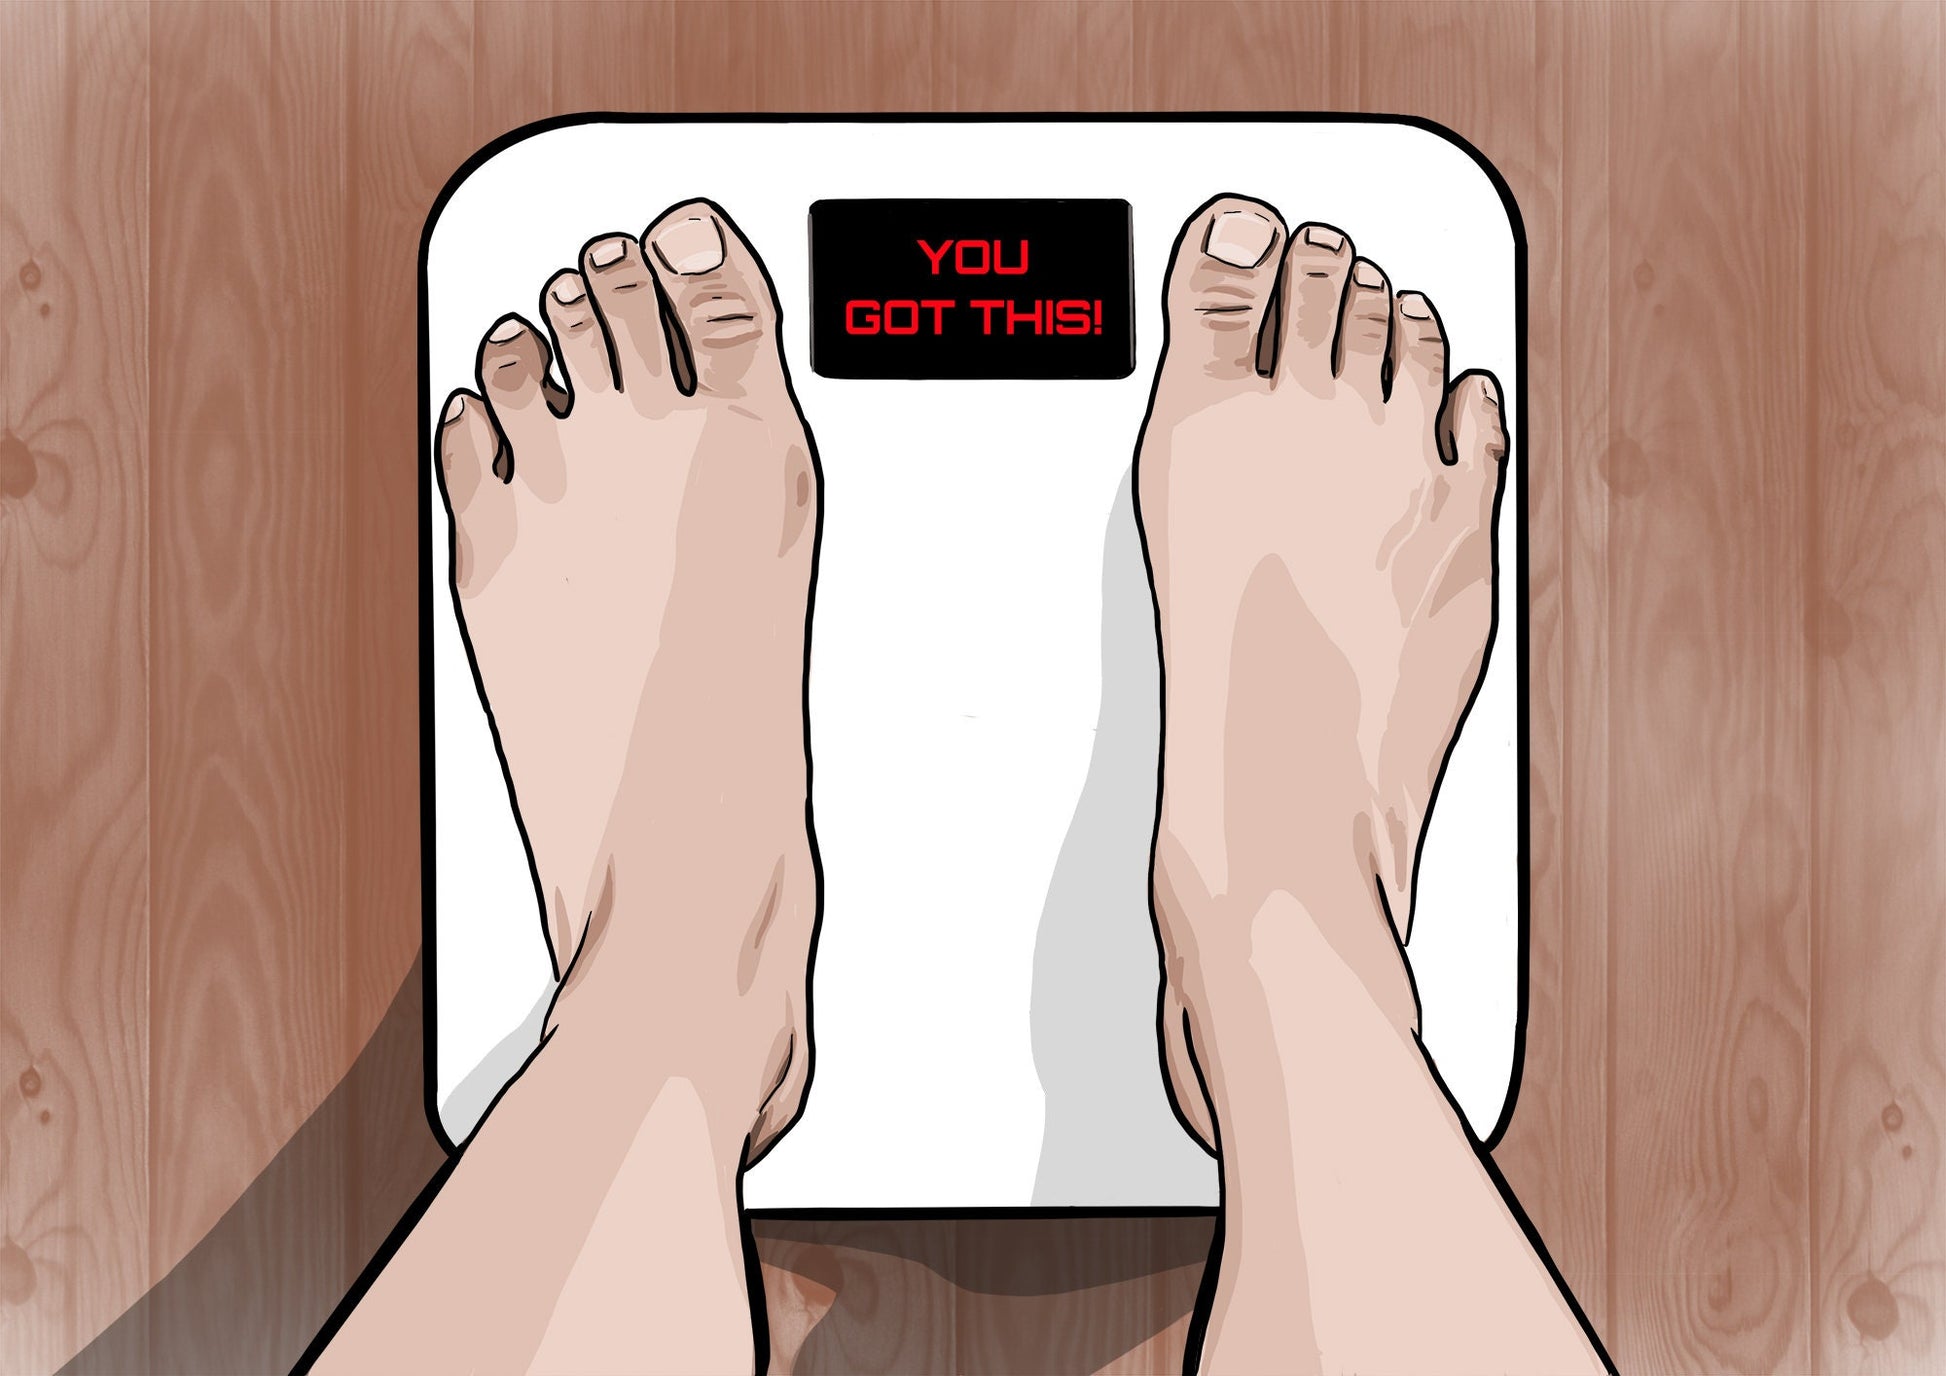 Weight Loss Support and Motivation Greeting Card "You Got This!" | Diet Success | Personalised Cards | Feet on Scale | Health | Reward